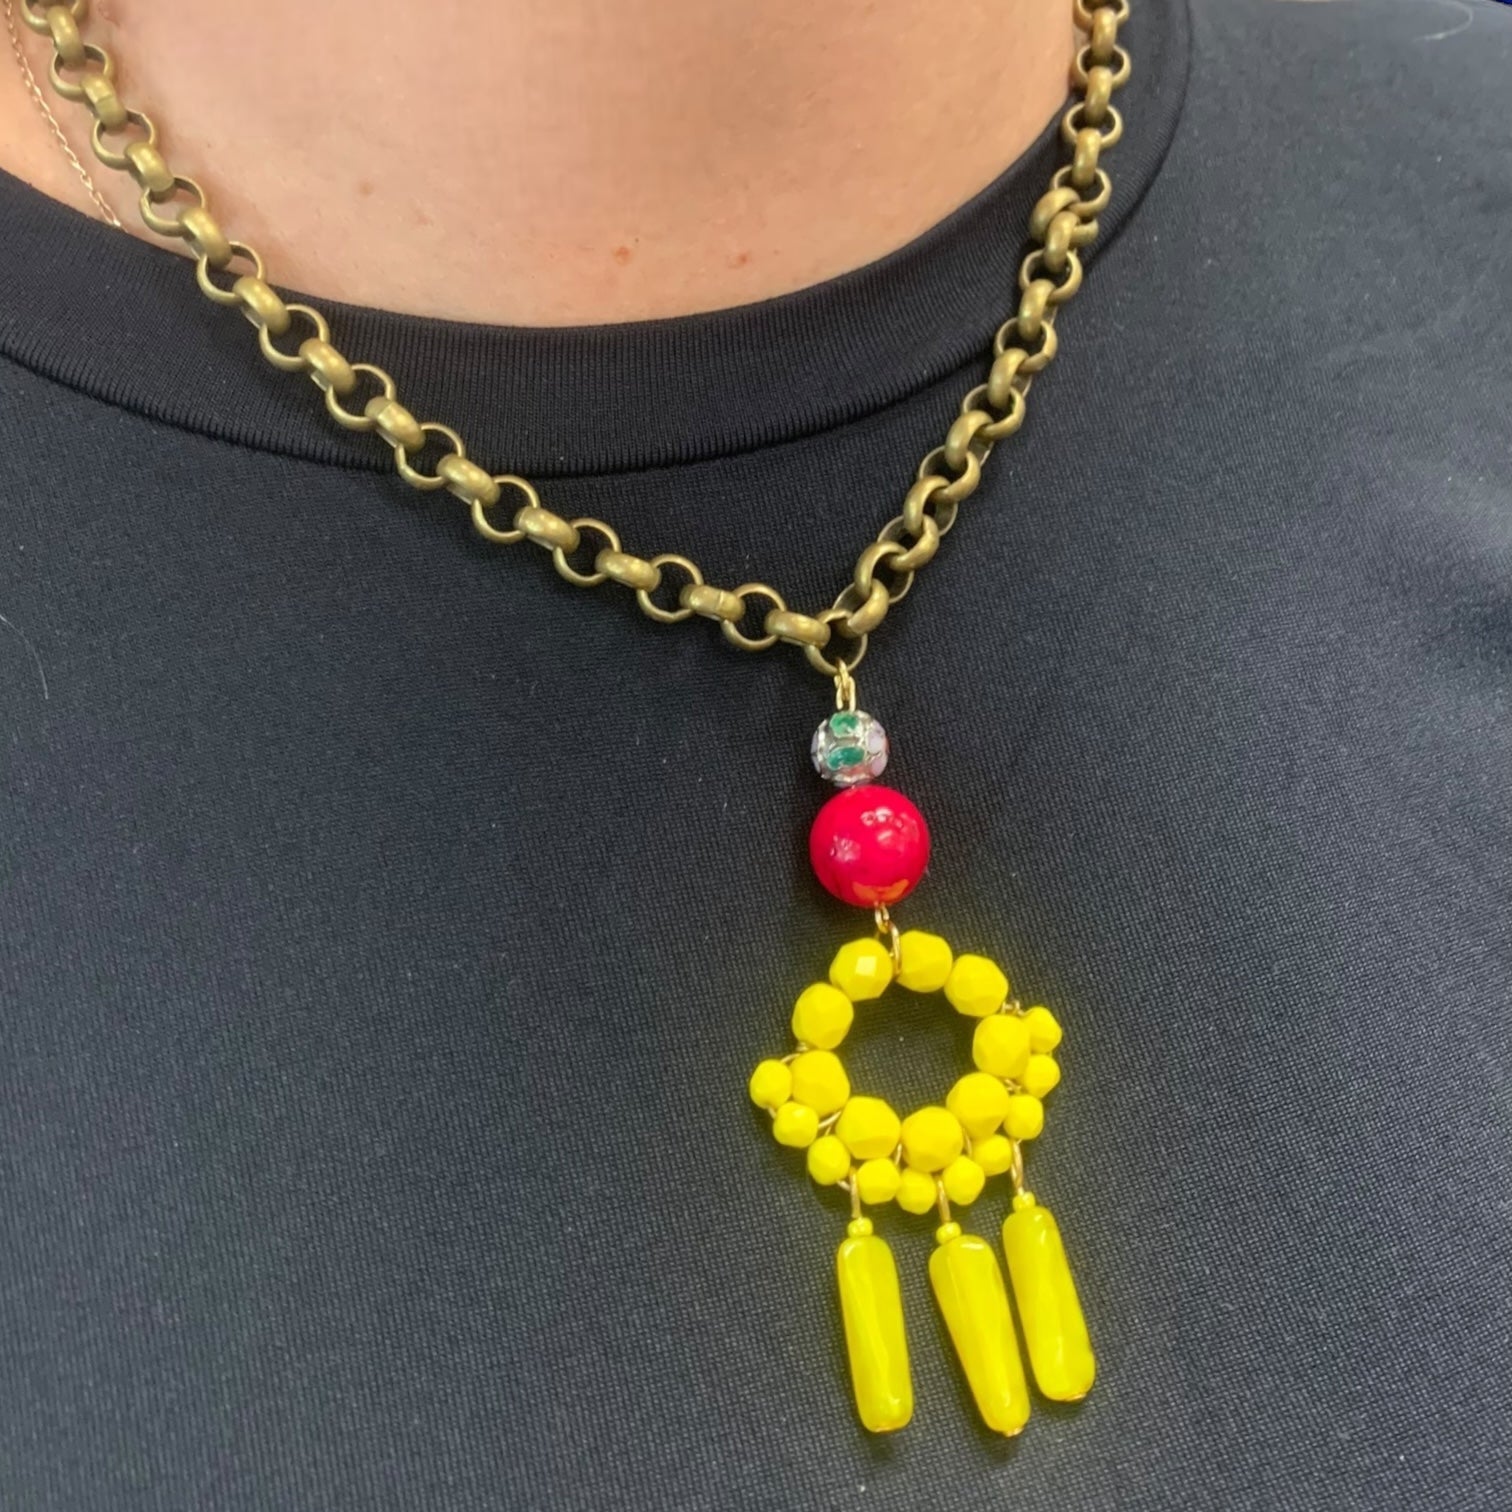 1 of 1 Bespoke Beaded Sunshine, Fuschia and Gold Statement Necklace-Necklace